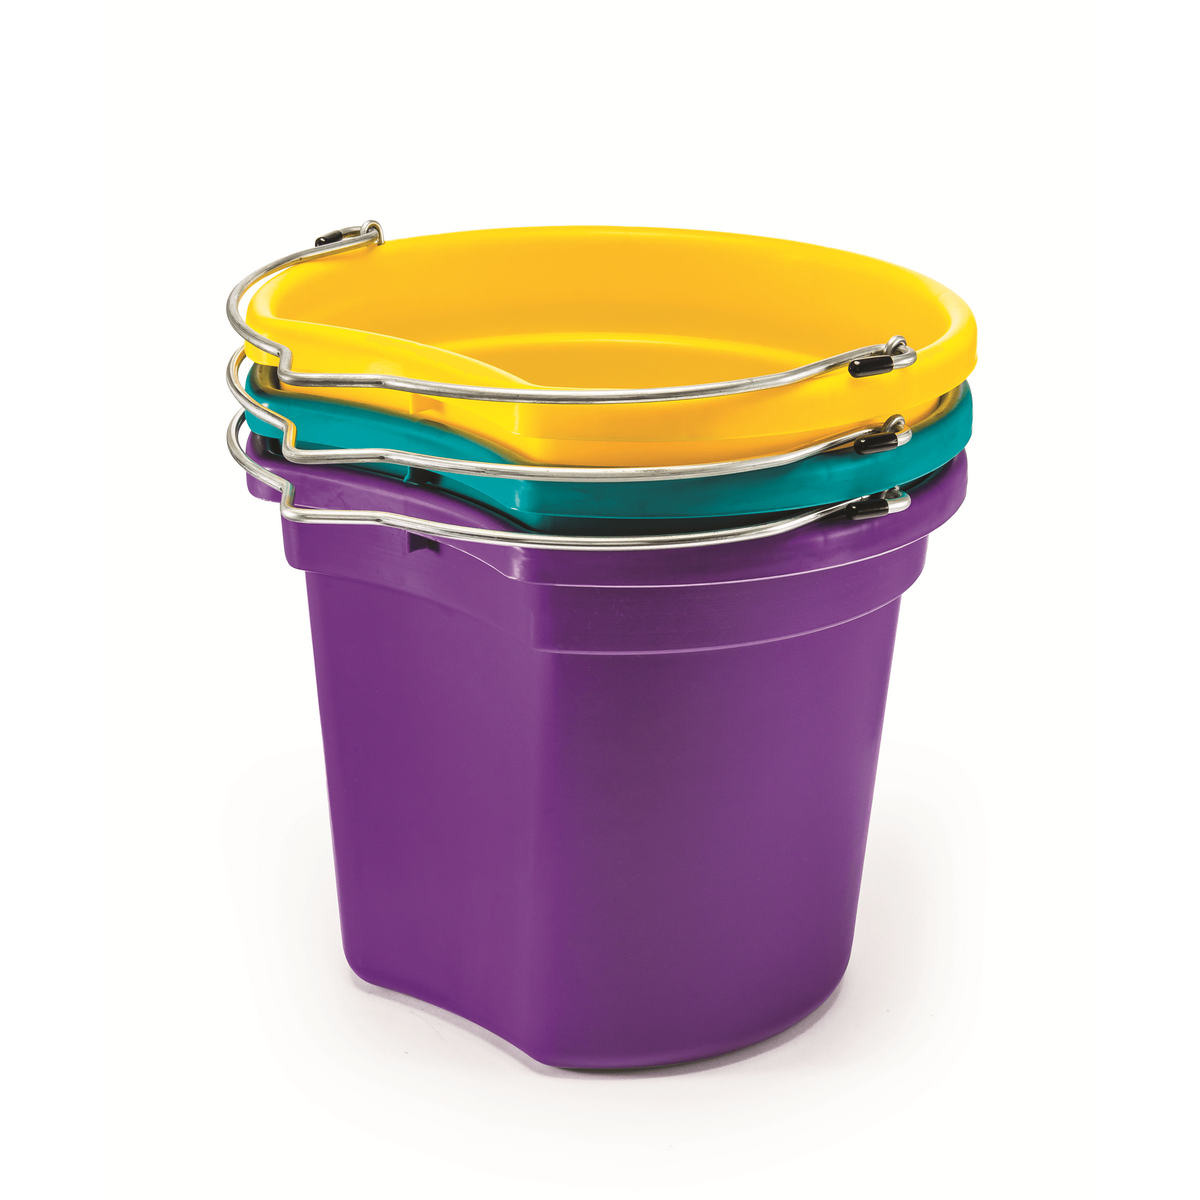 Forever Handle V Bucket Handle for 5 Gallon Buckets